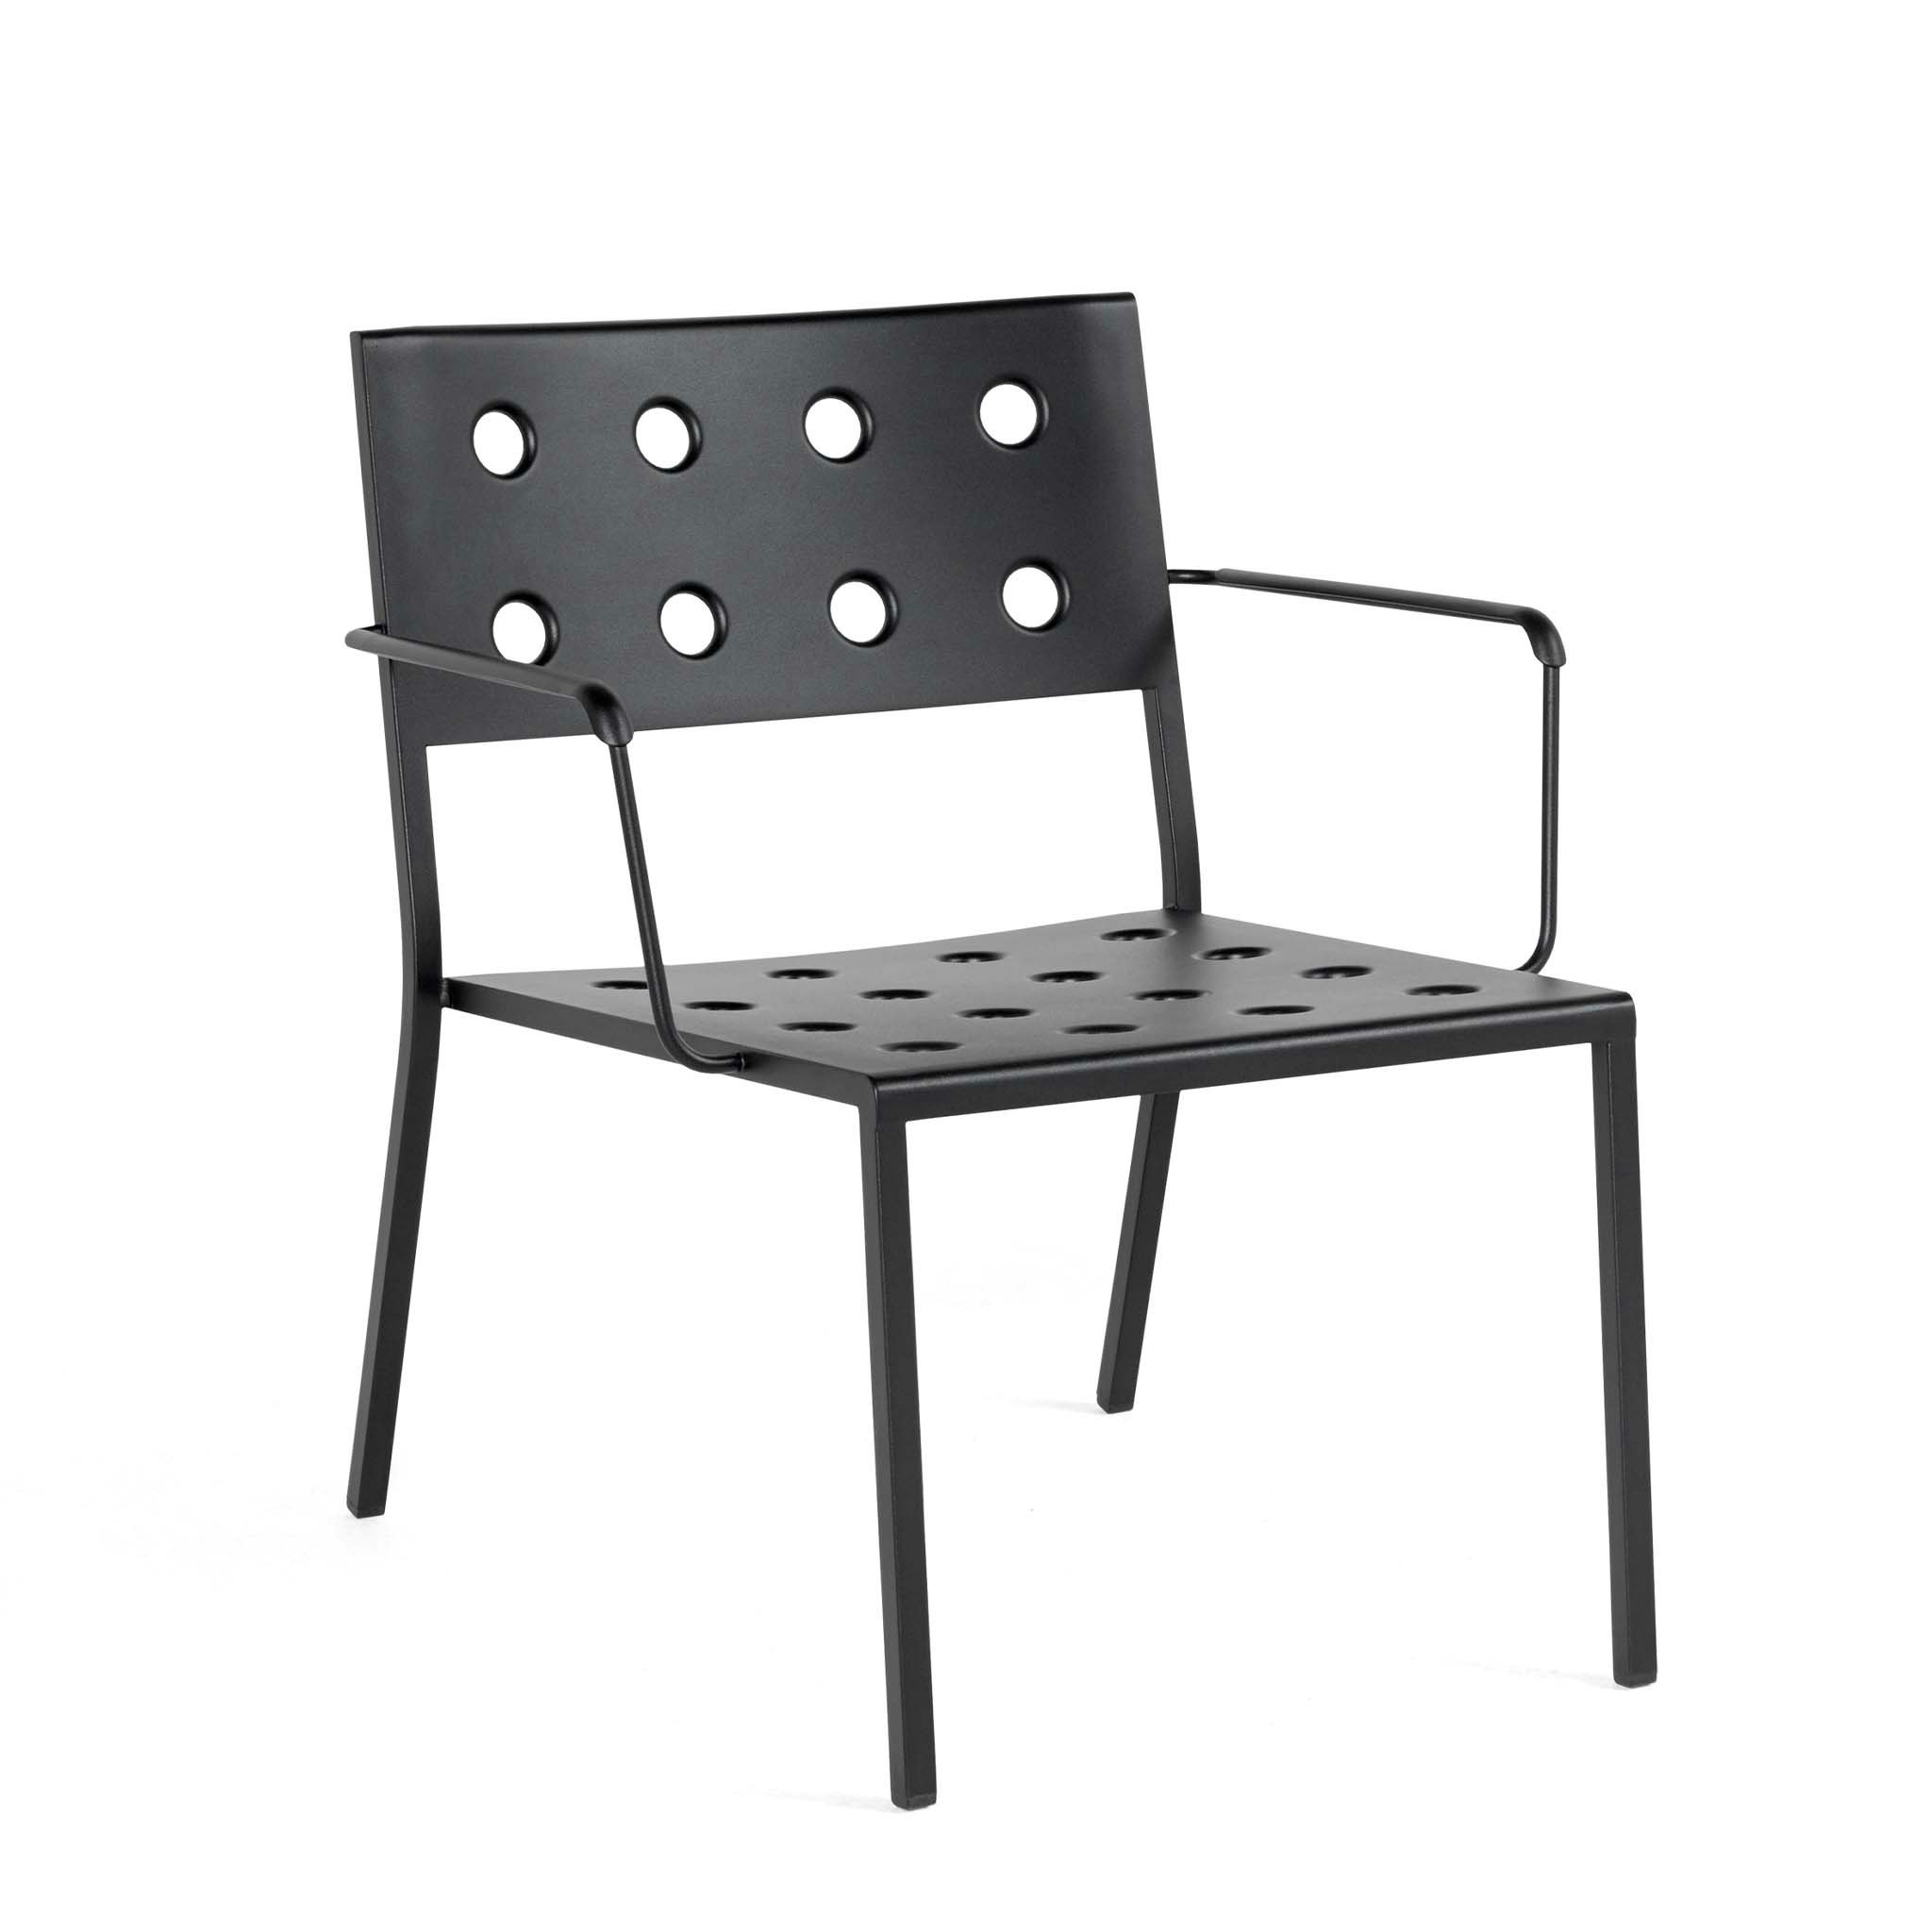 Balcony Lounge Armchair By Ronan and Erwan Bouroullec for Hay